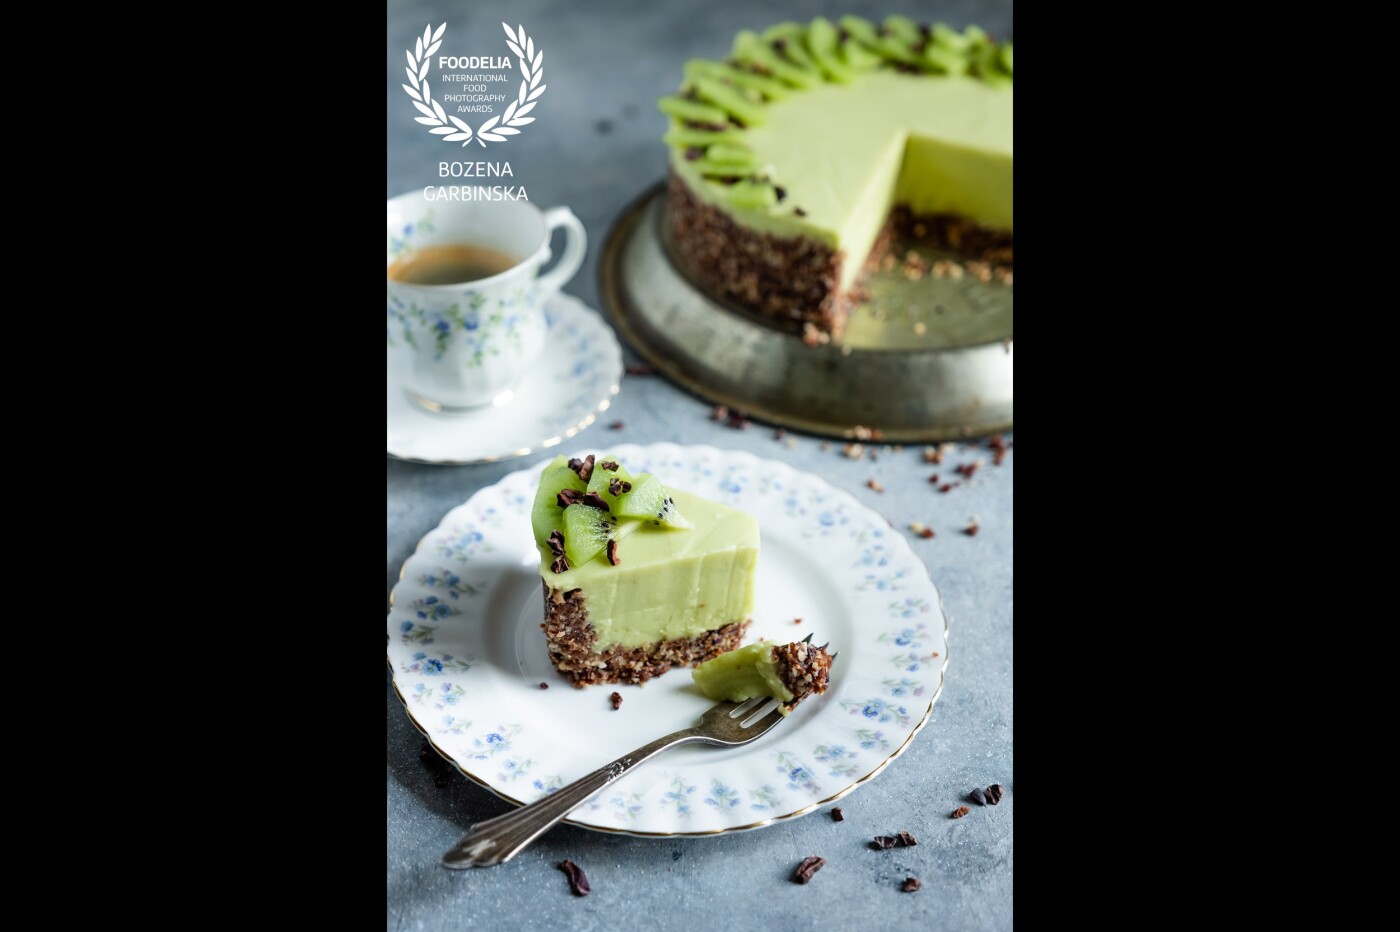 Avocado cheesecake. Smooth and delicious. <br />
Camera: Fuji X-T20 <br />
Lens: Fujinon 16-55 mm <br />
Settings: ISO 200, 40mm, 125s, f/2.8 <br />
Shot using natural light.